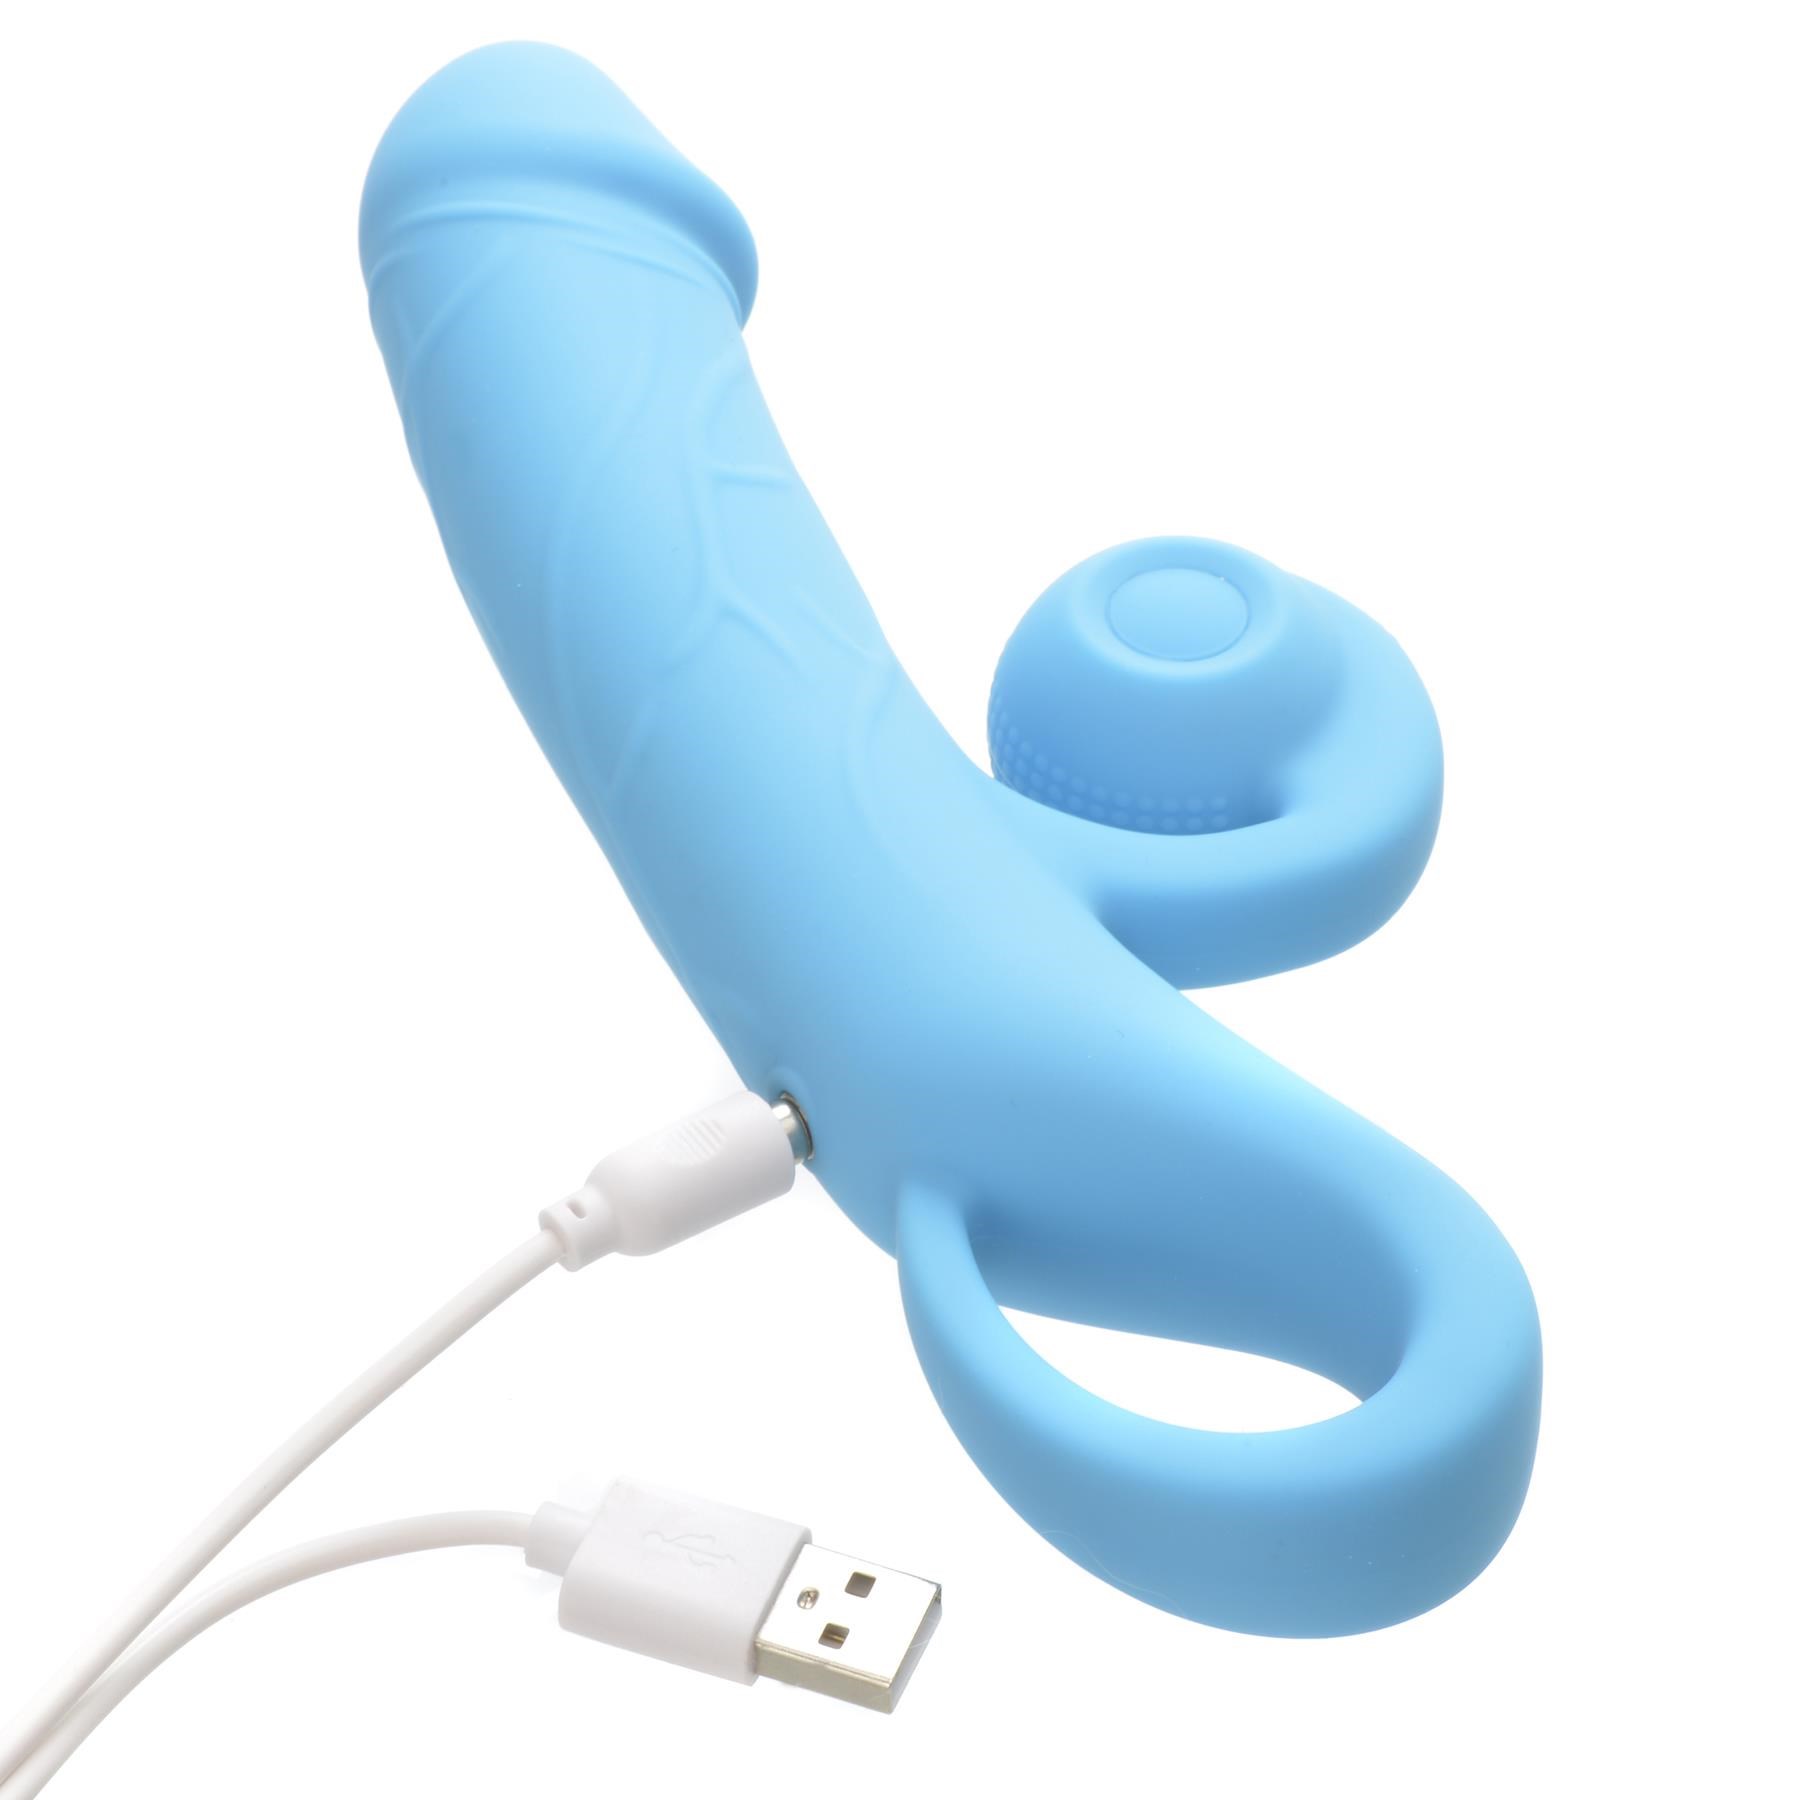 Realistic Rechargeable Vibrator with Clit Bumper- Showing Where Charging Cable is Placed